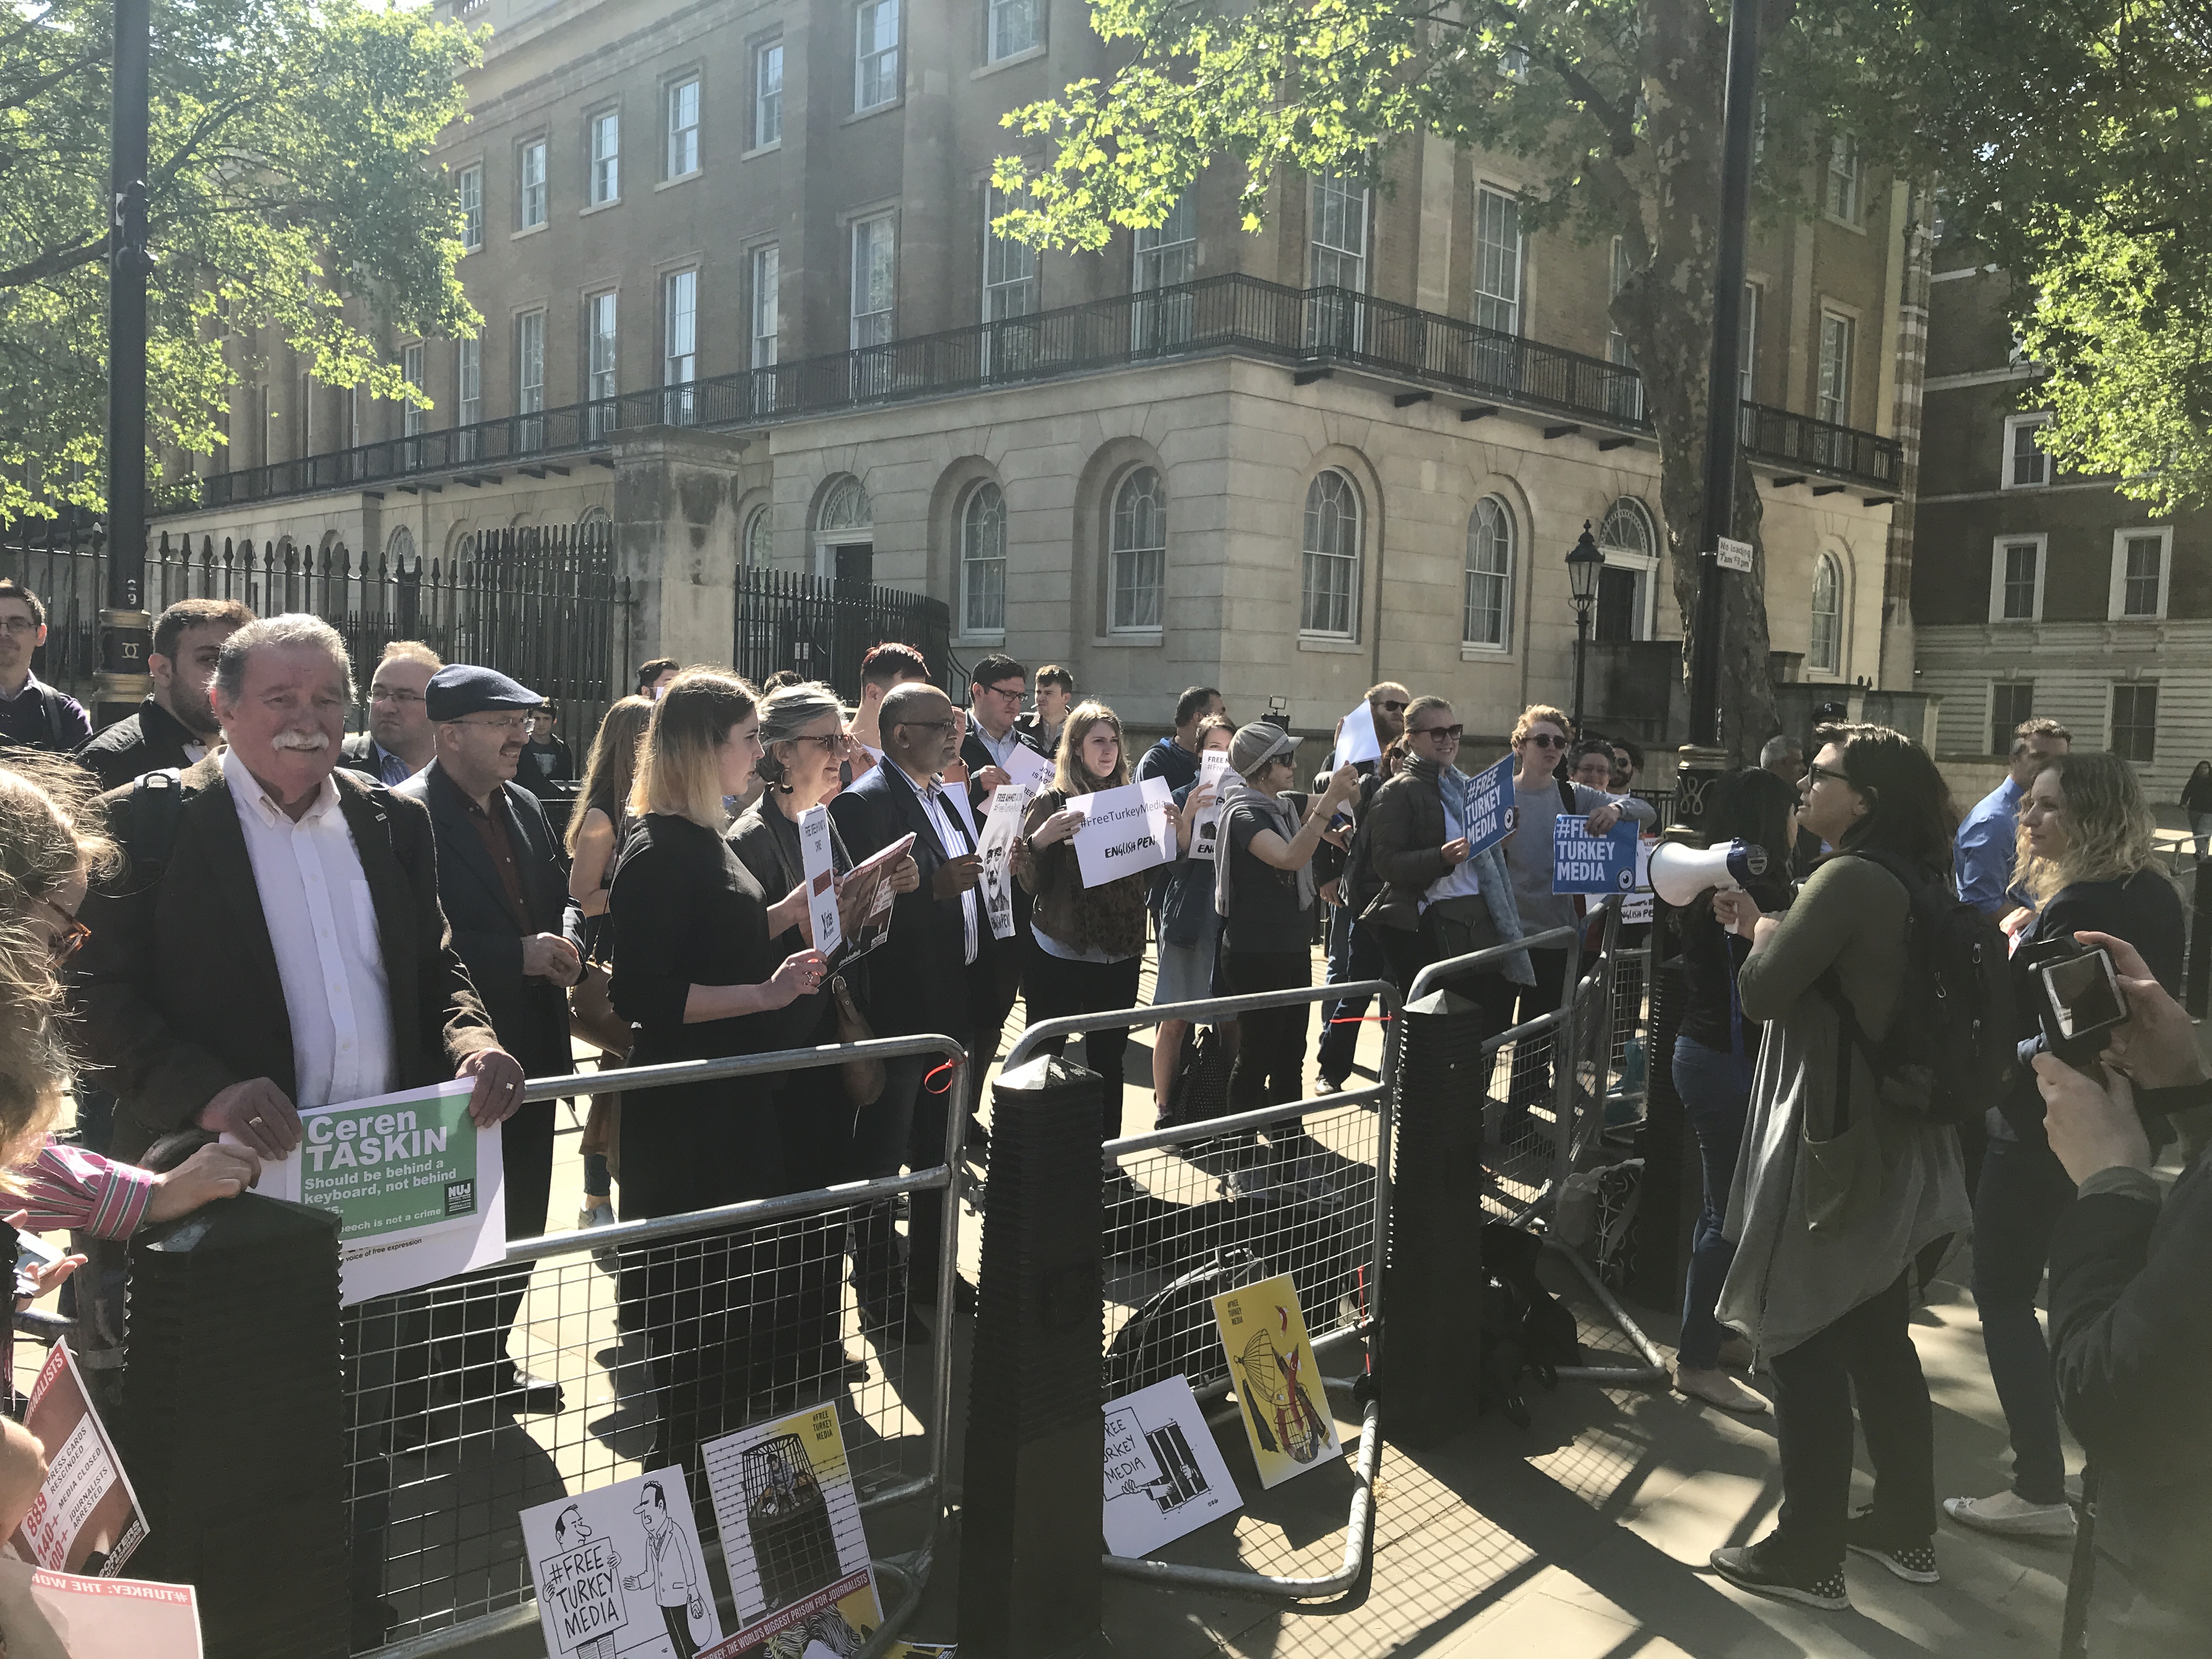 Downing Street protest: Hundreds voice anger ahead of Erdogan visit